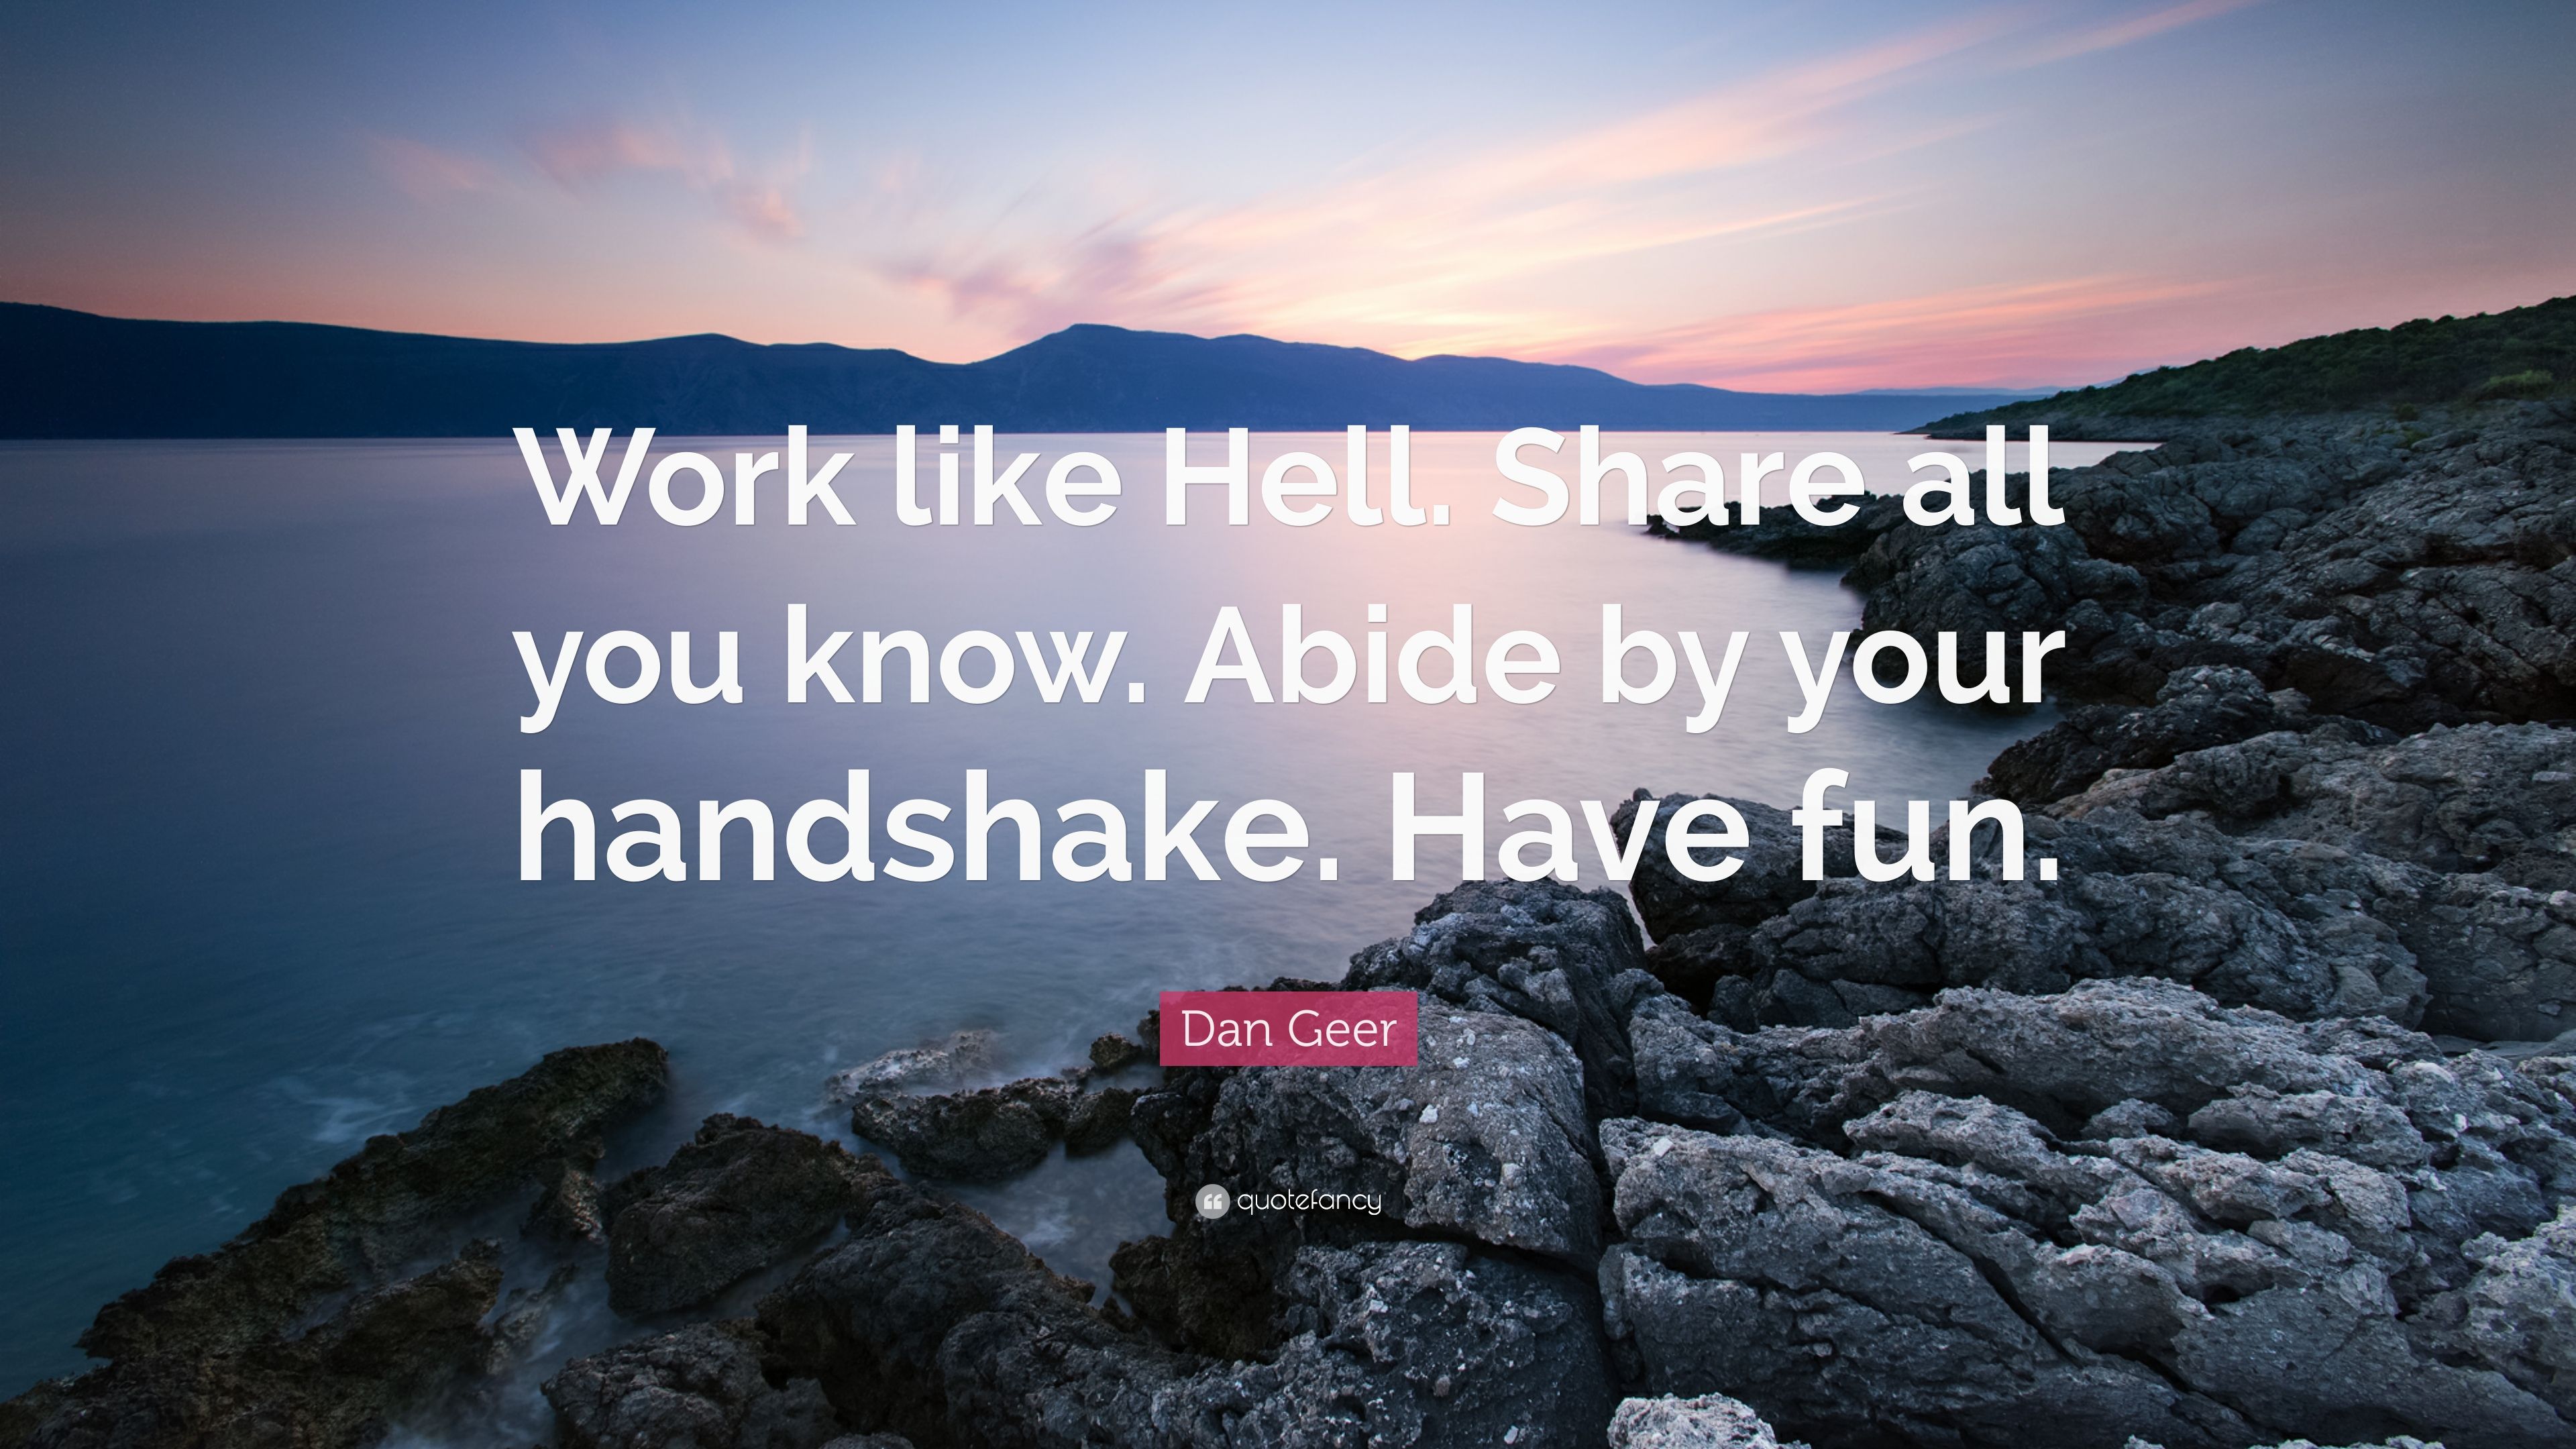 Dan Geer Quote: “Work like Hell. Share all you know. Abide by your handshake. Have fun.” (7 wallpaper)